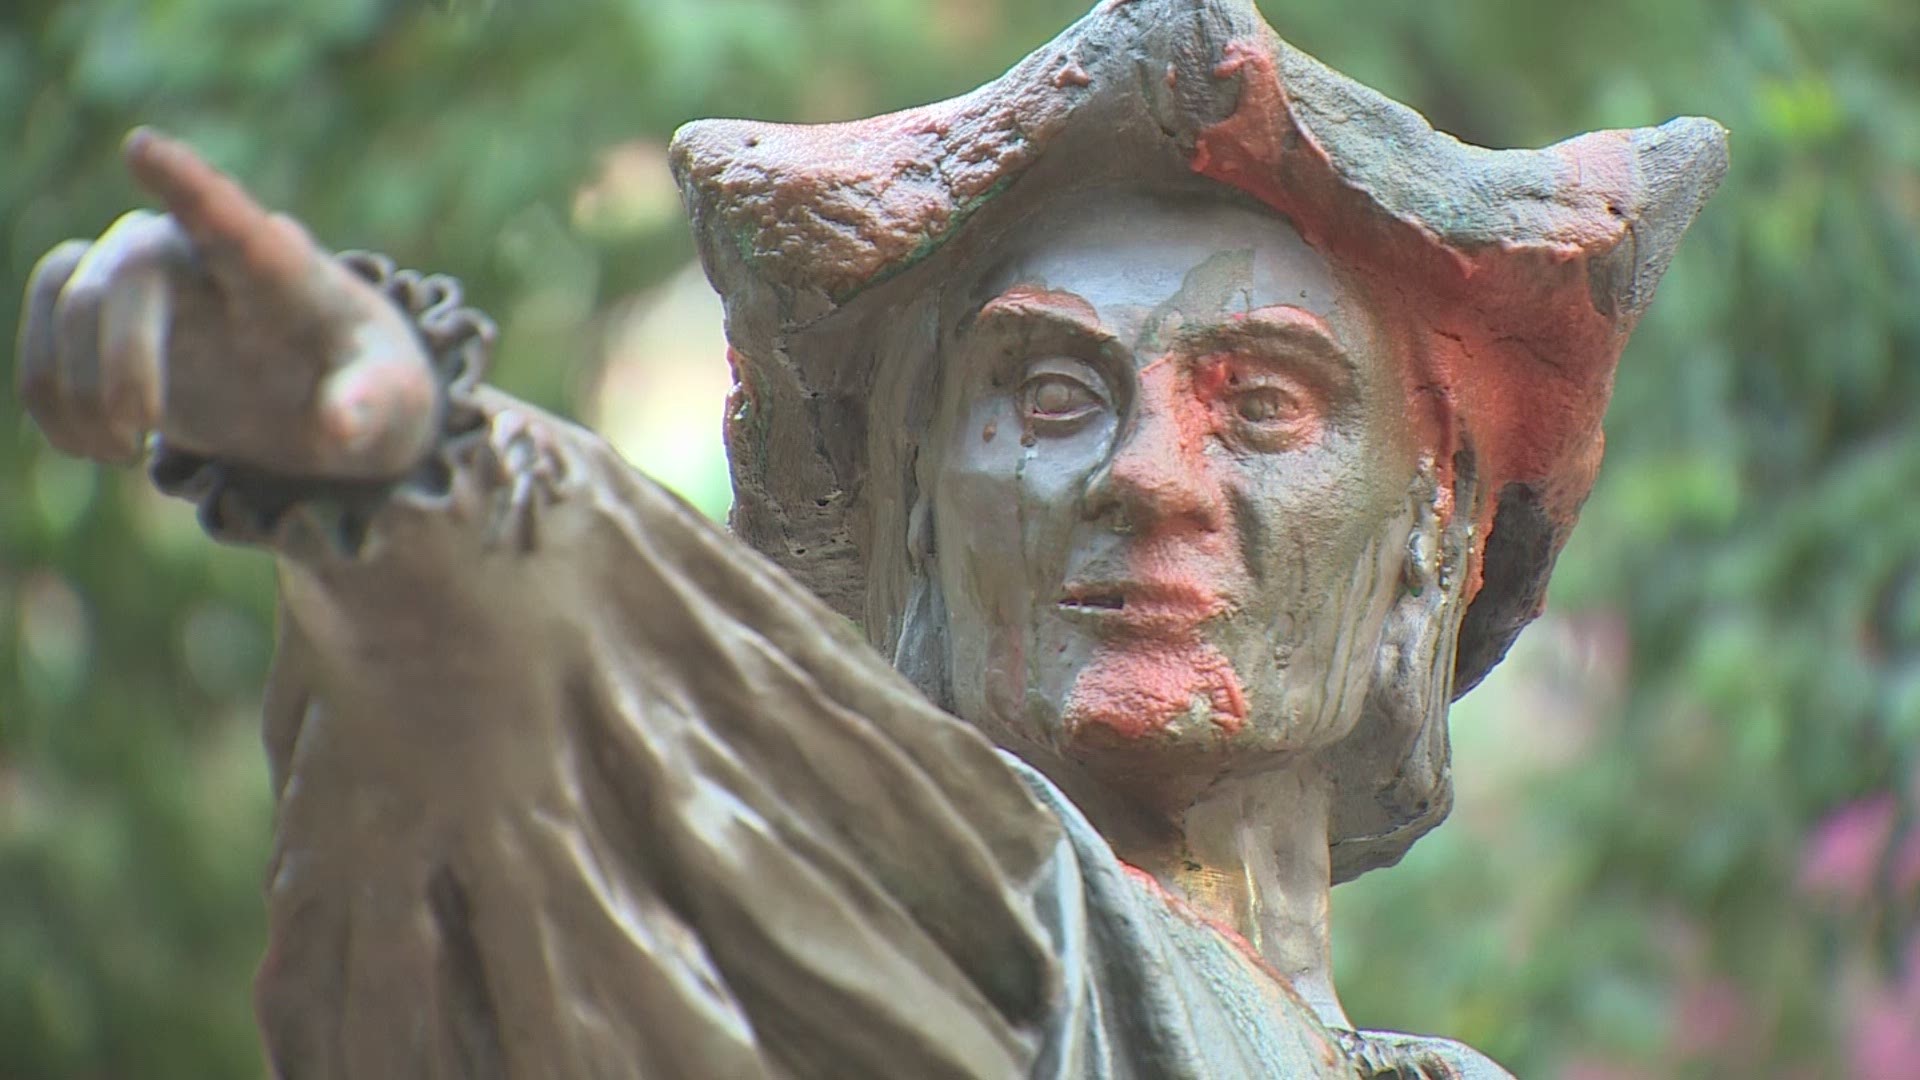 The Christopher Columbus statue in Houston's Bell Park has been vandalized for a third time in the last week. Someone splashed the statue with tomato sauce.